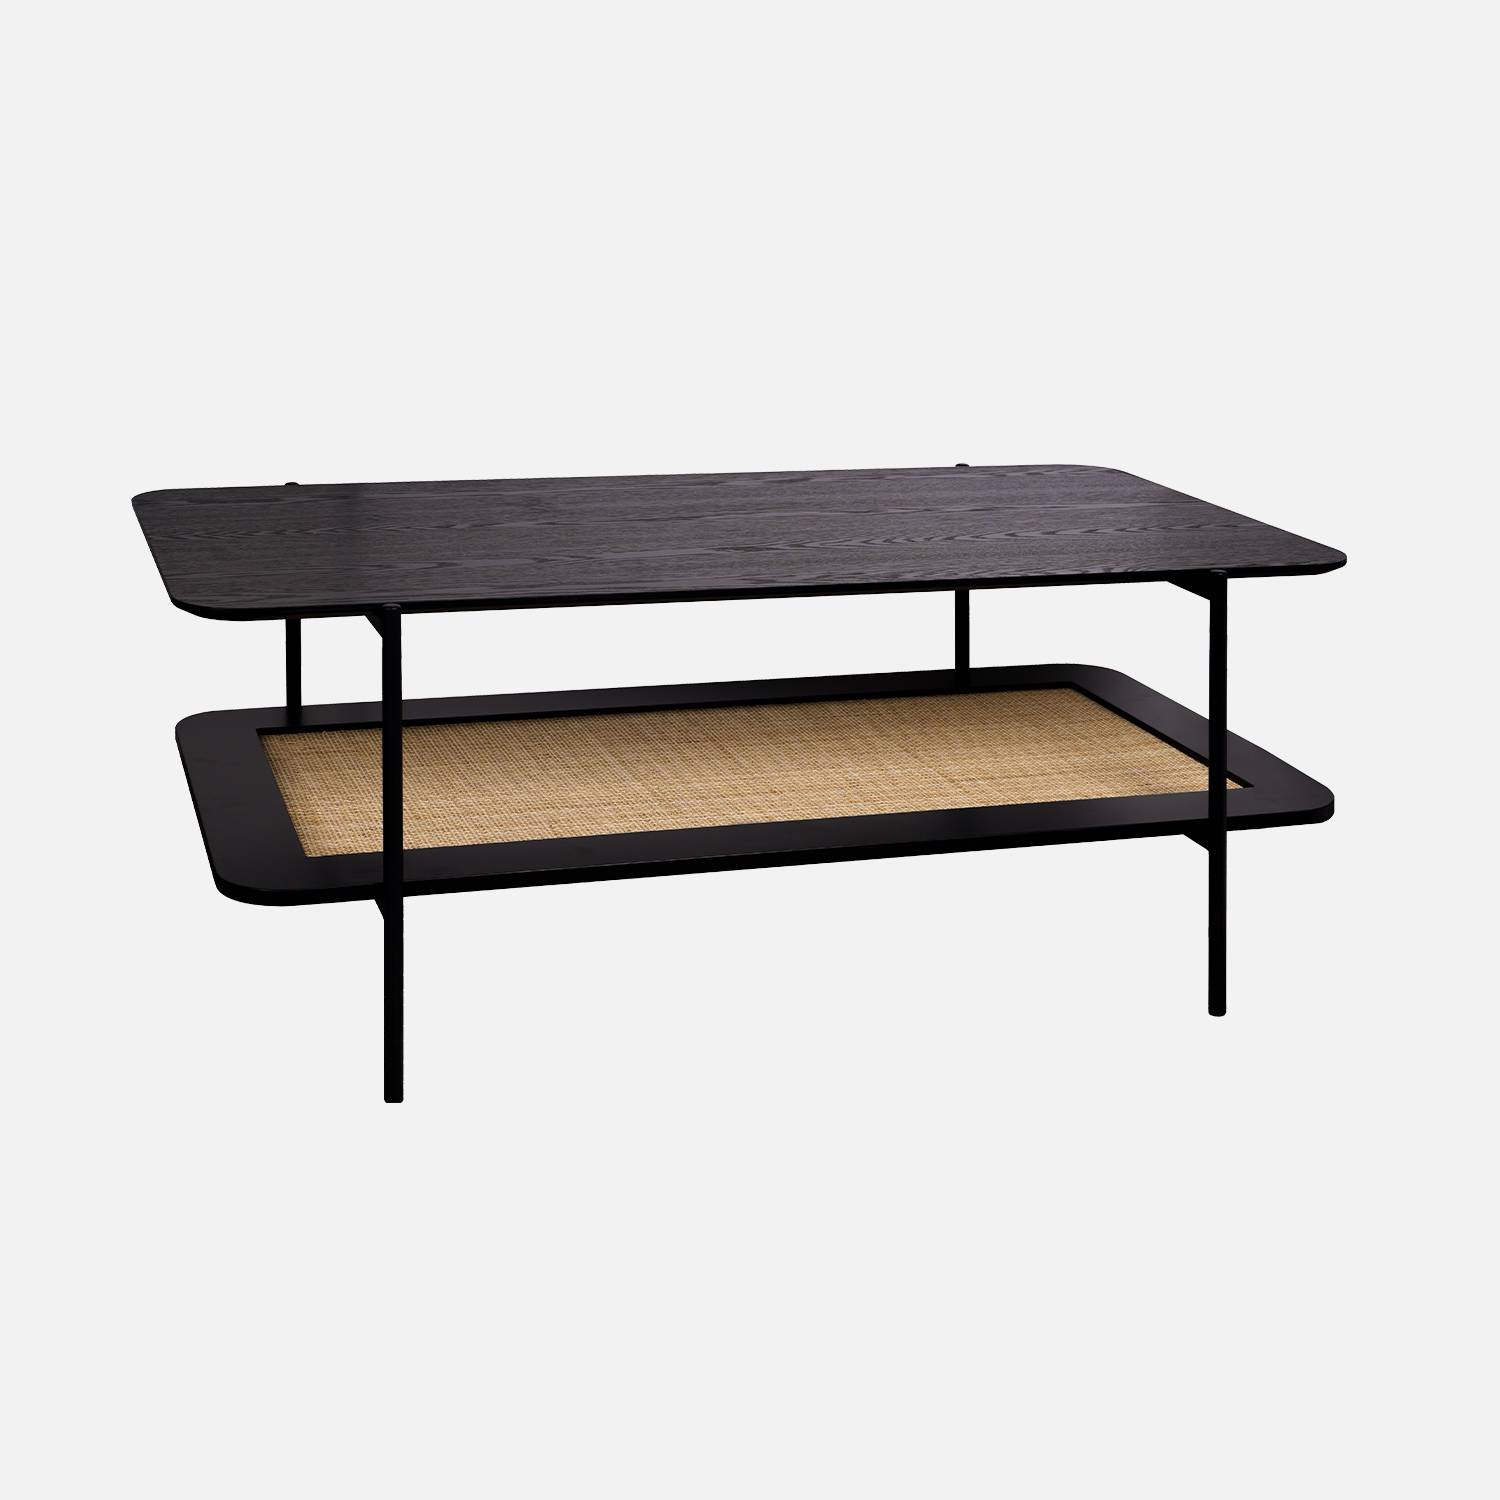 110cm coffee table with wood and cane effect, Black